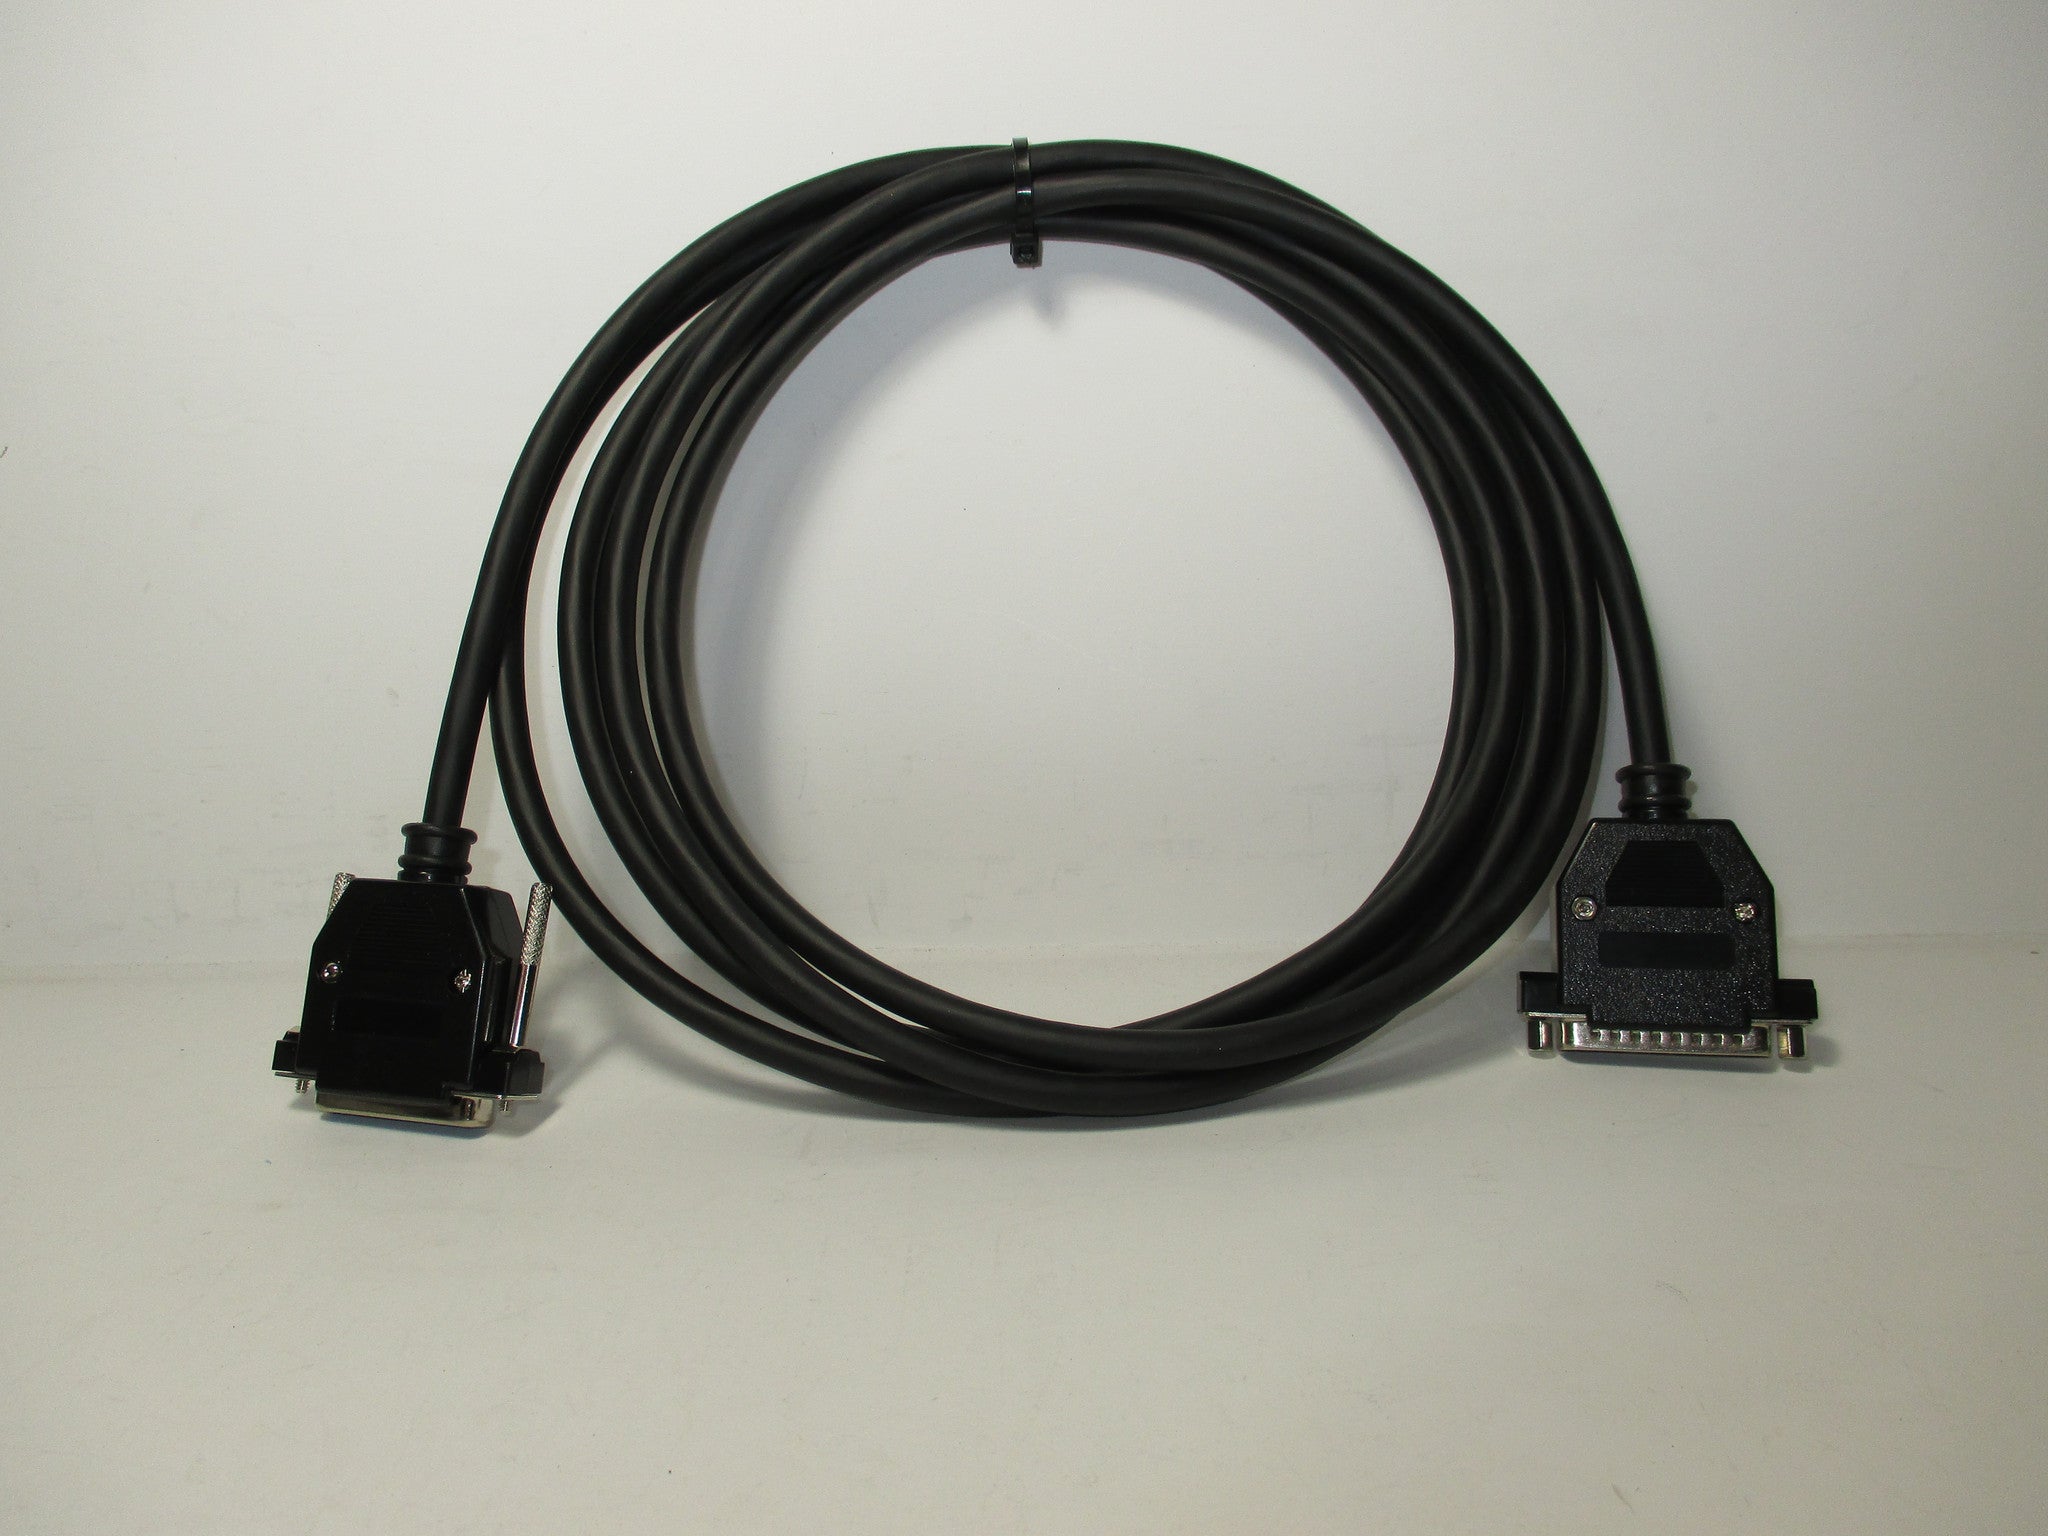 SPX OBDII CABLE EXTENSION, 9', P.N., 534 06317X9